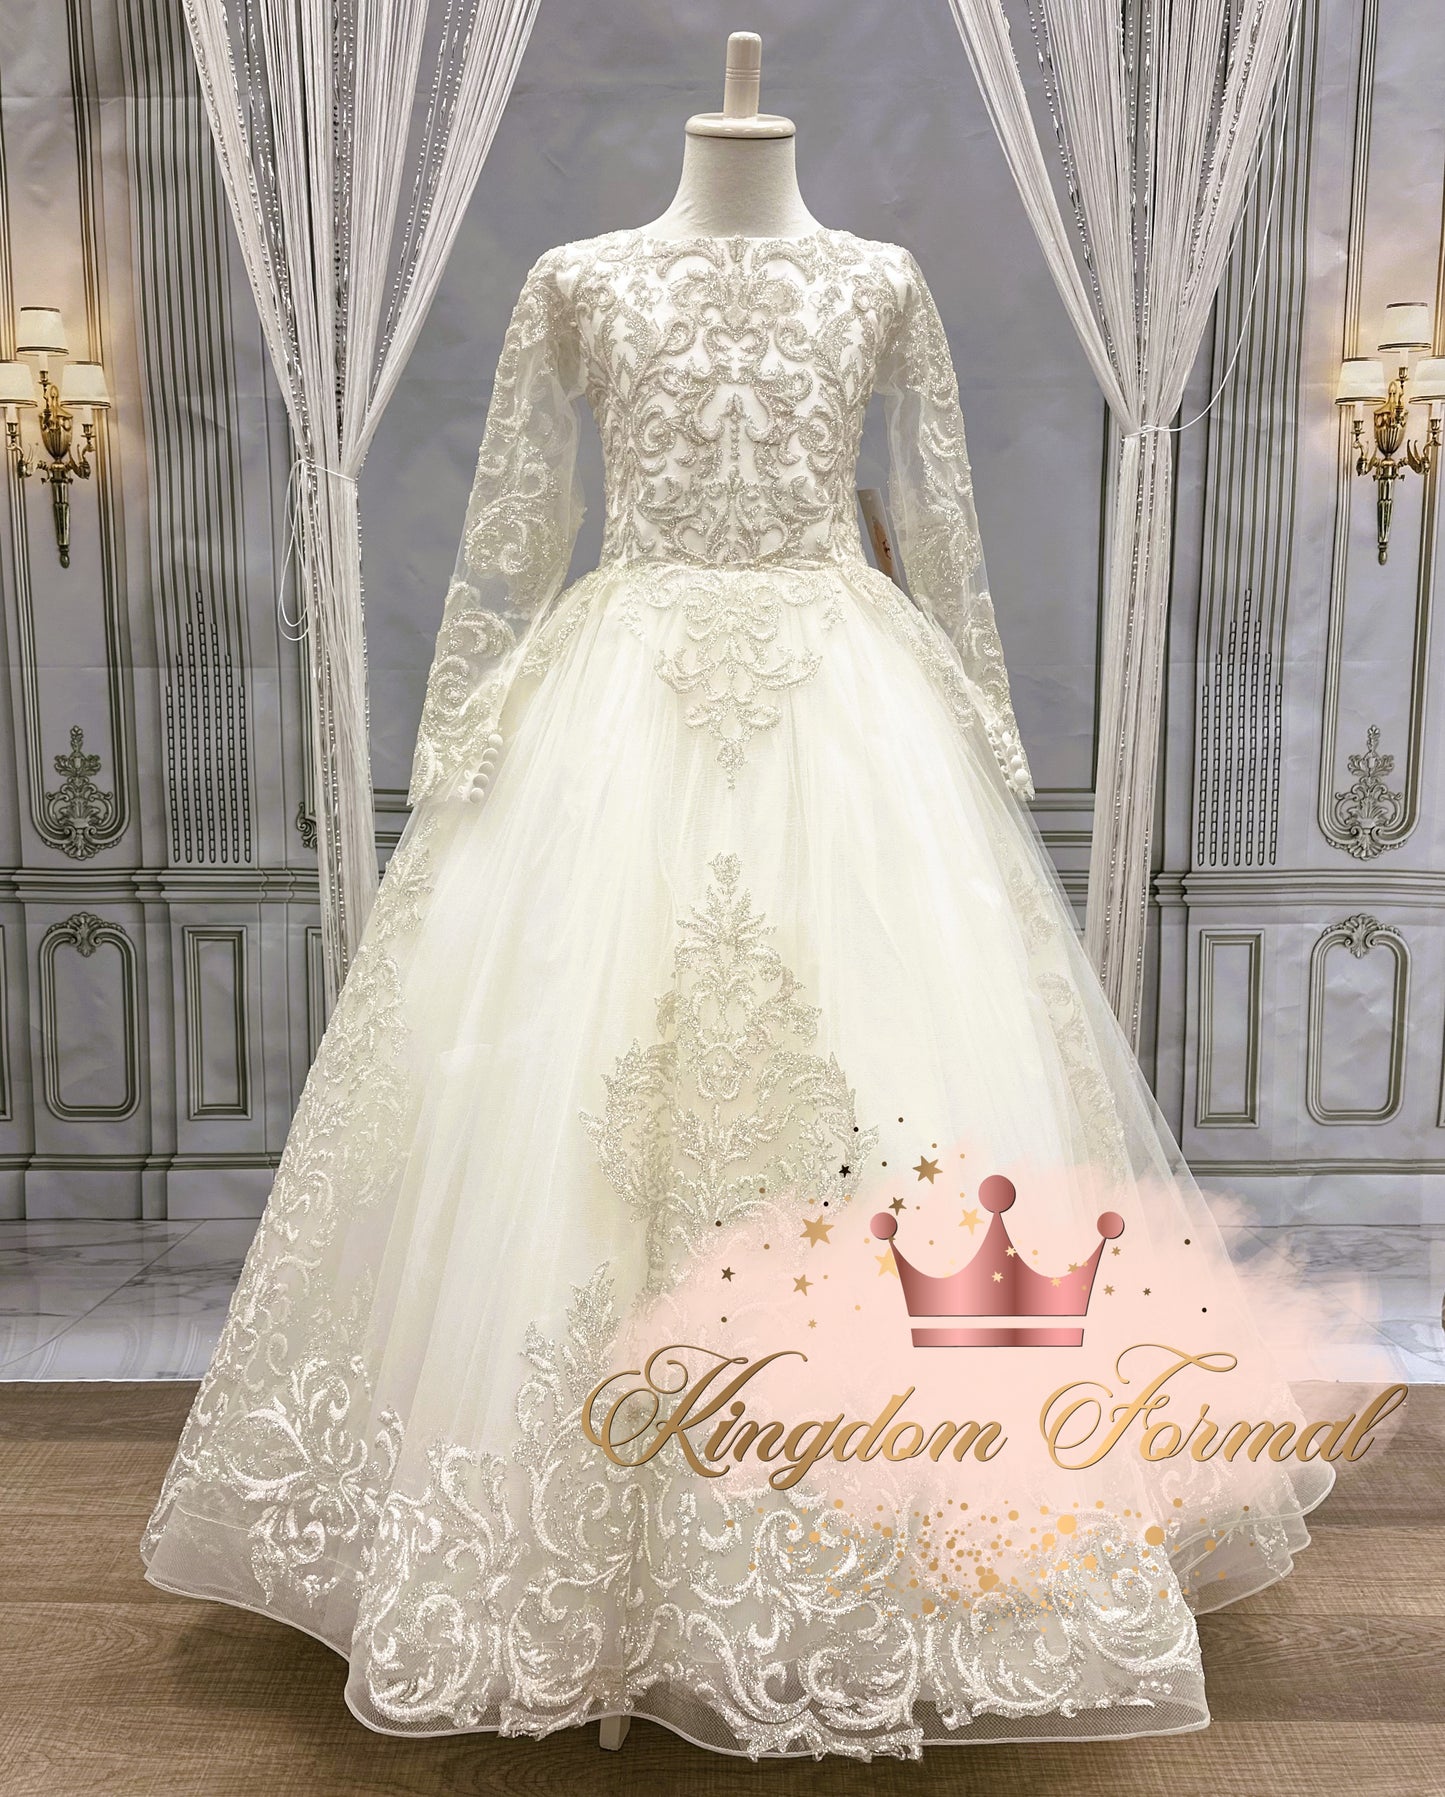 The Lurice Gown